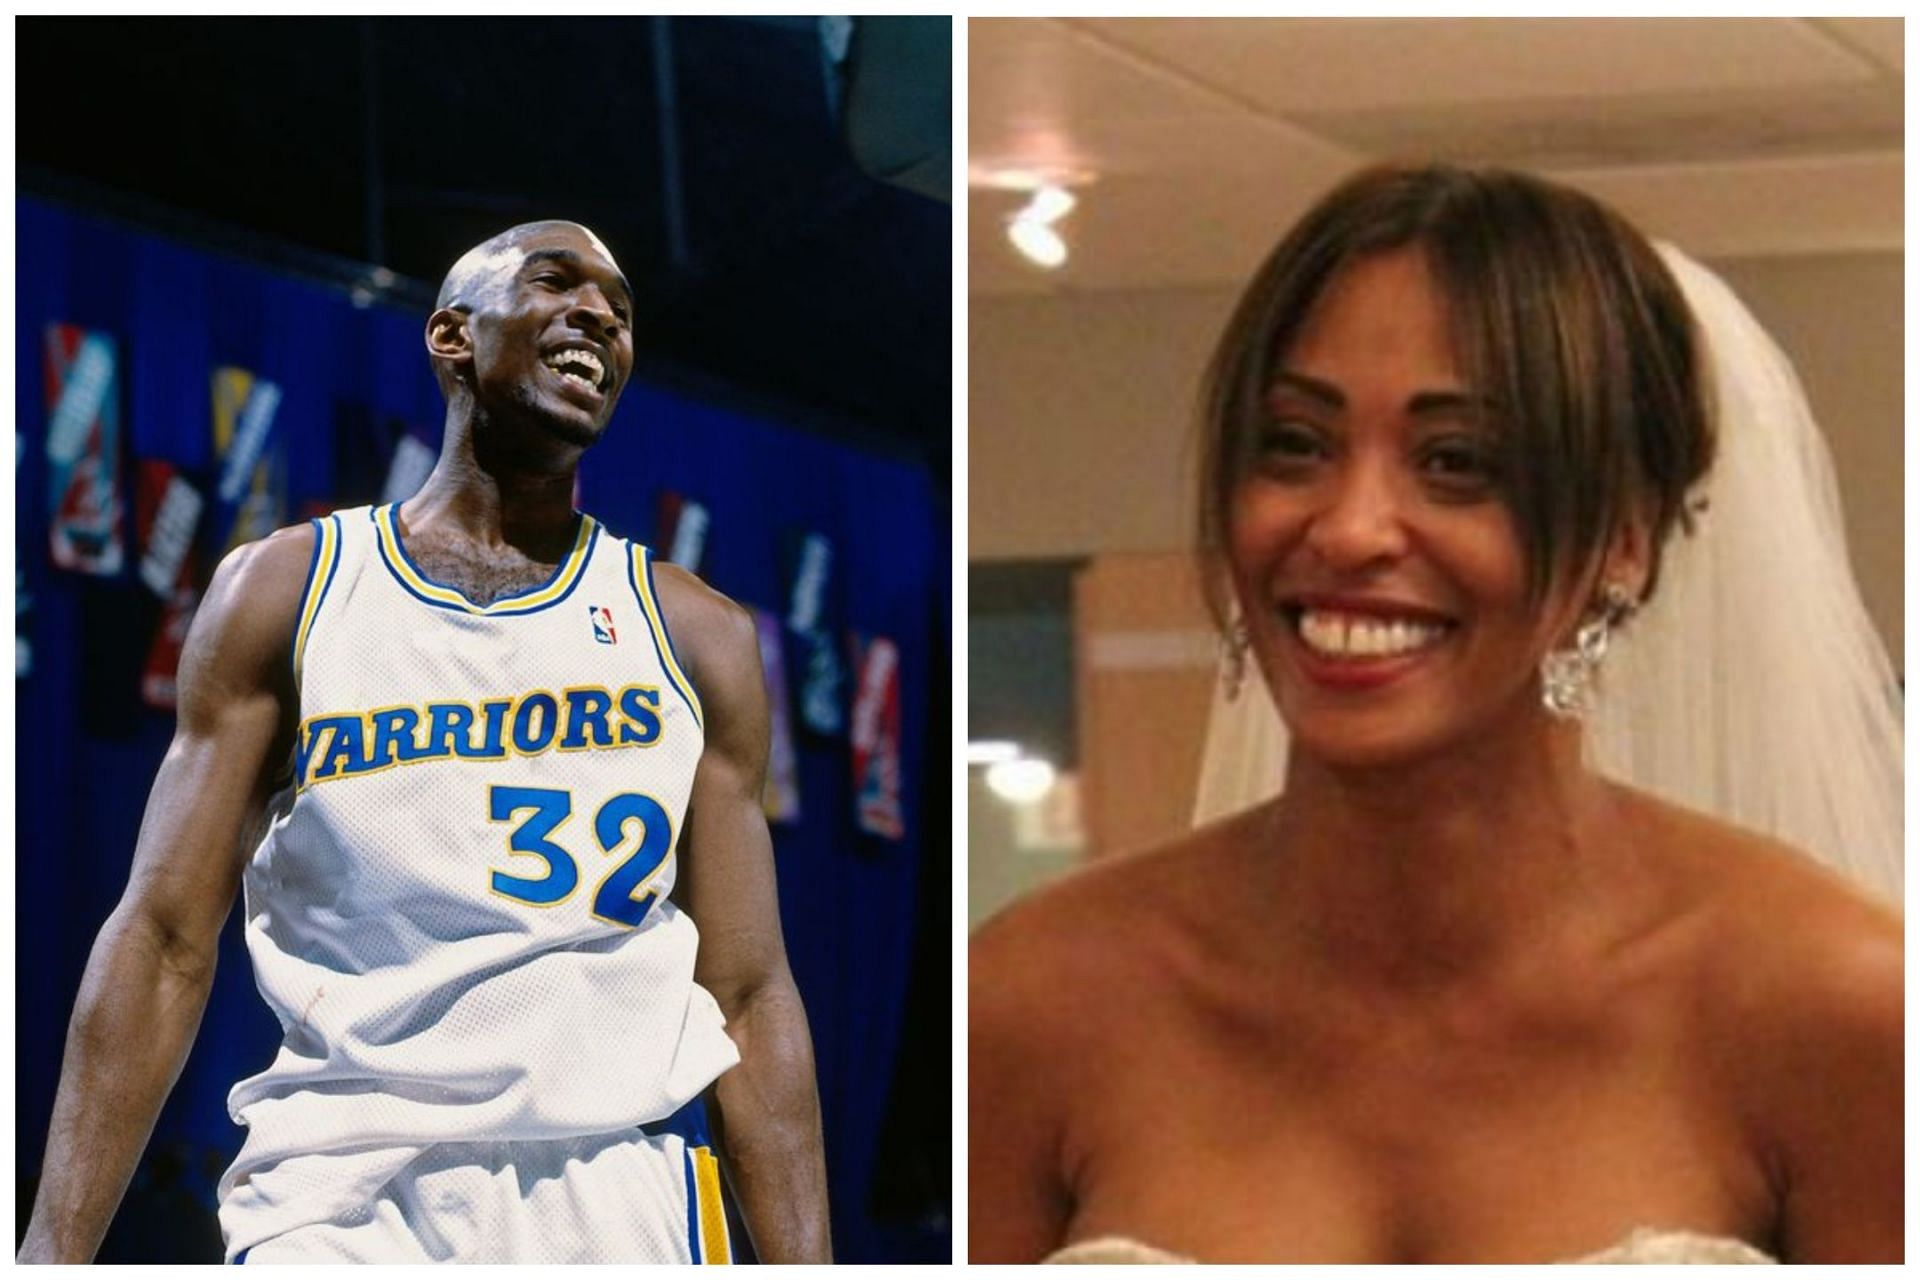 Former NBA player Joe Smith confronted his wife Kisha Chavis for creating an OnlyFans account